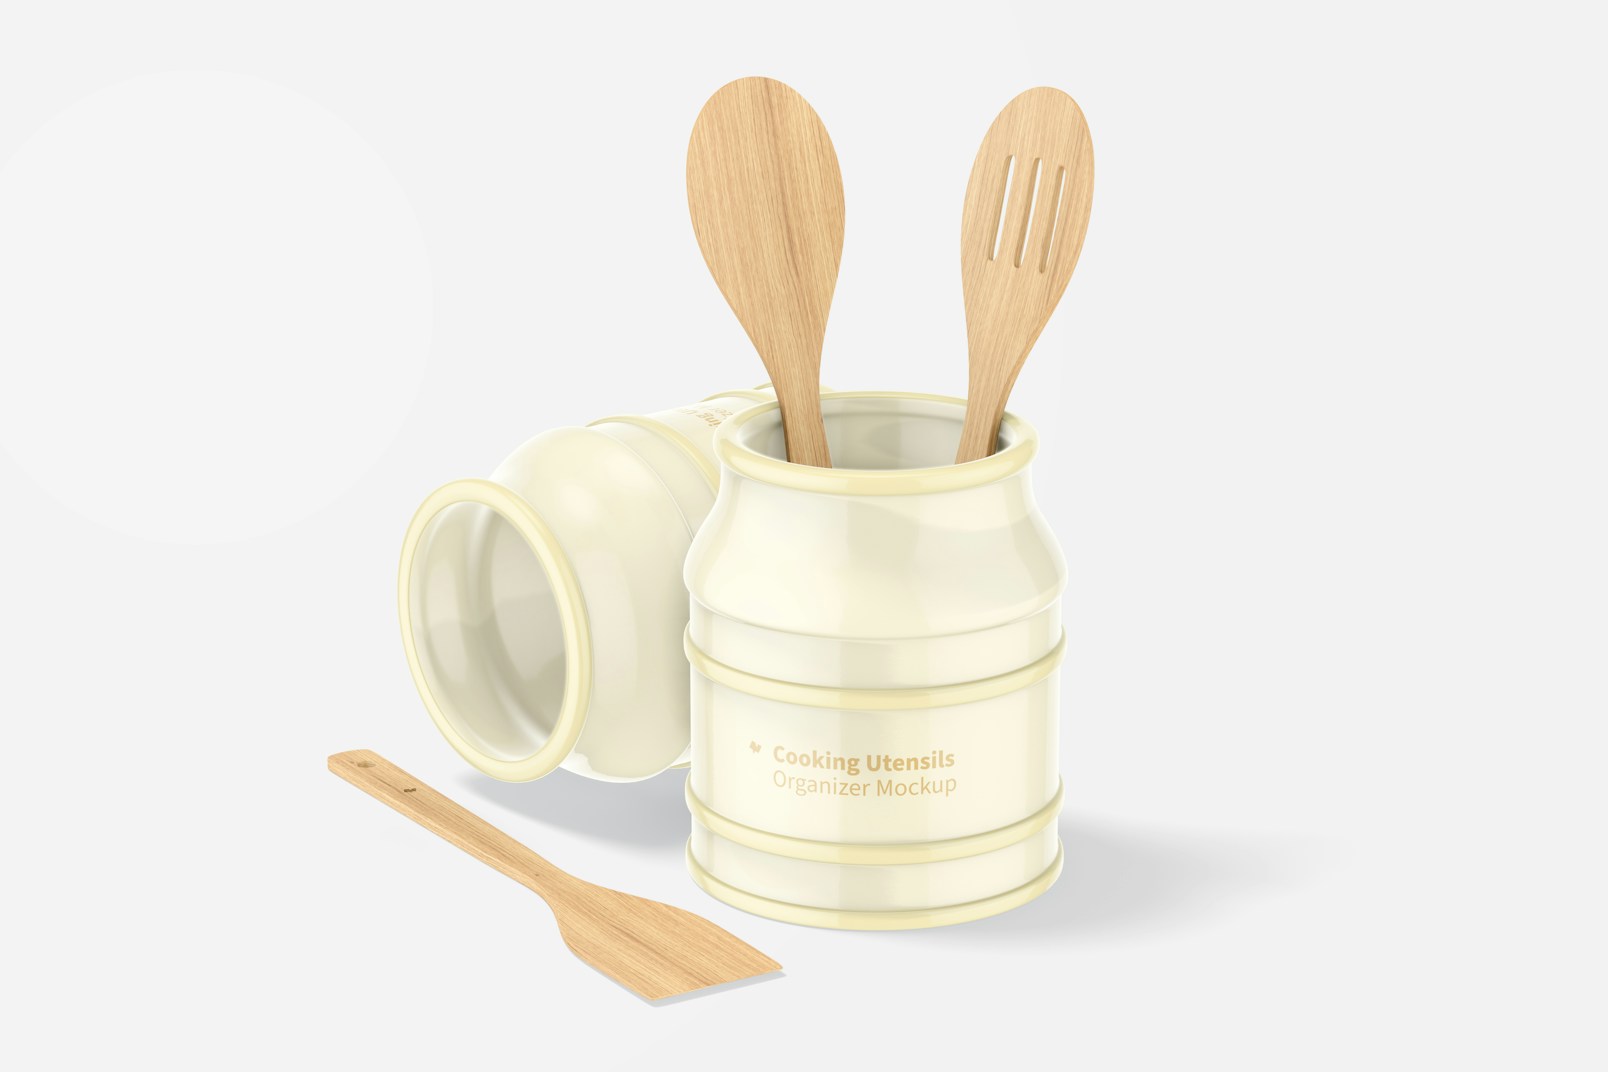 Cooking Utensils Organizers Mockup, Dropped and Standing